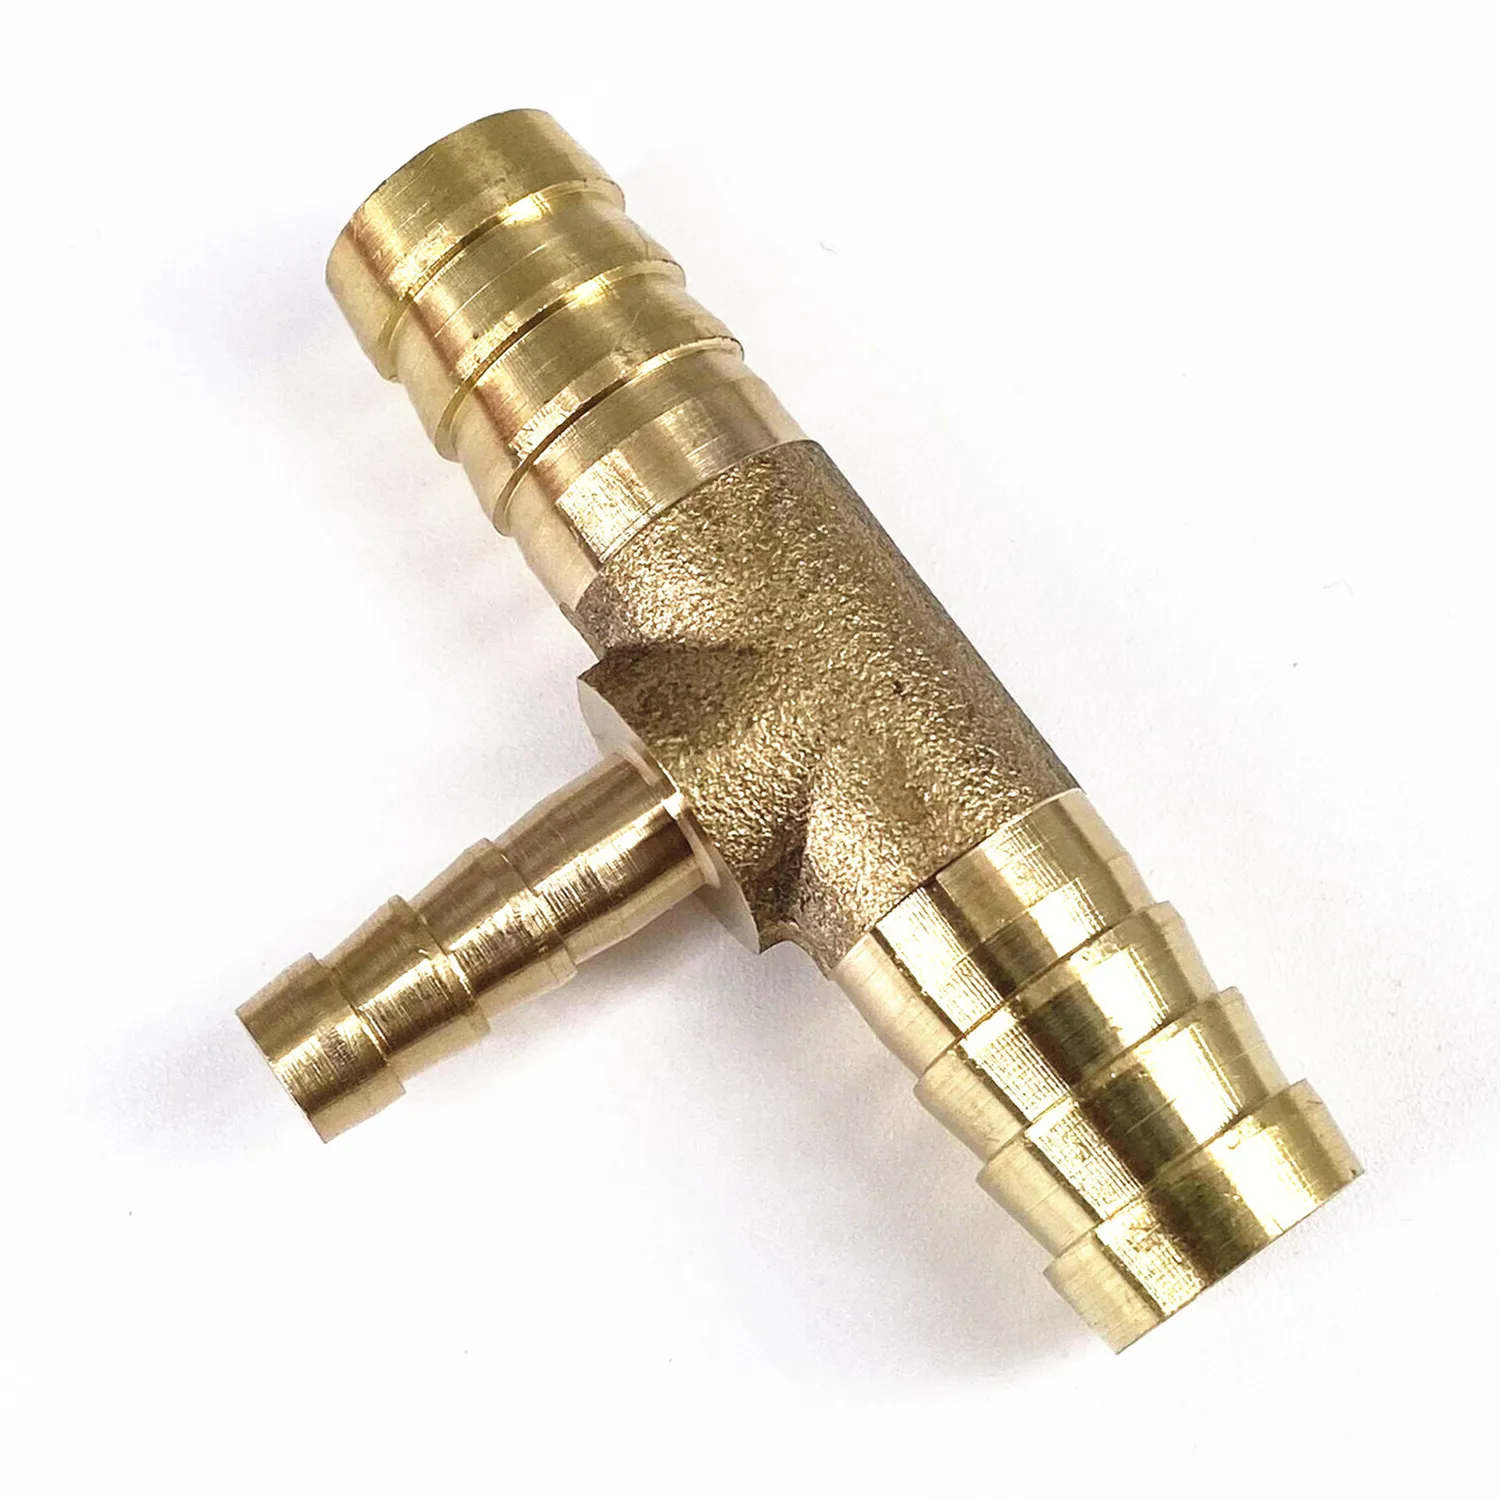 

Hose Barb 4mm 5mm 6mm 8mm 10mm 12mm 14mm 16mm Tee Type Reducing Brass Barbed Pipe Fitting Reducer Coupler Connector Adapter